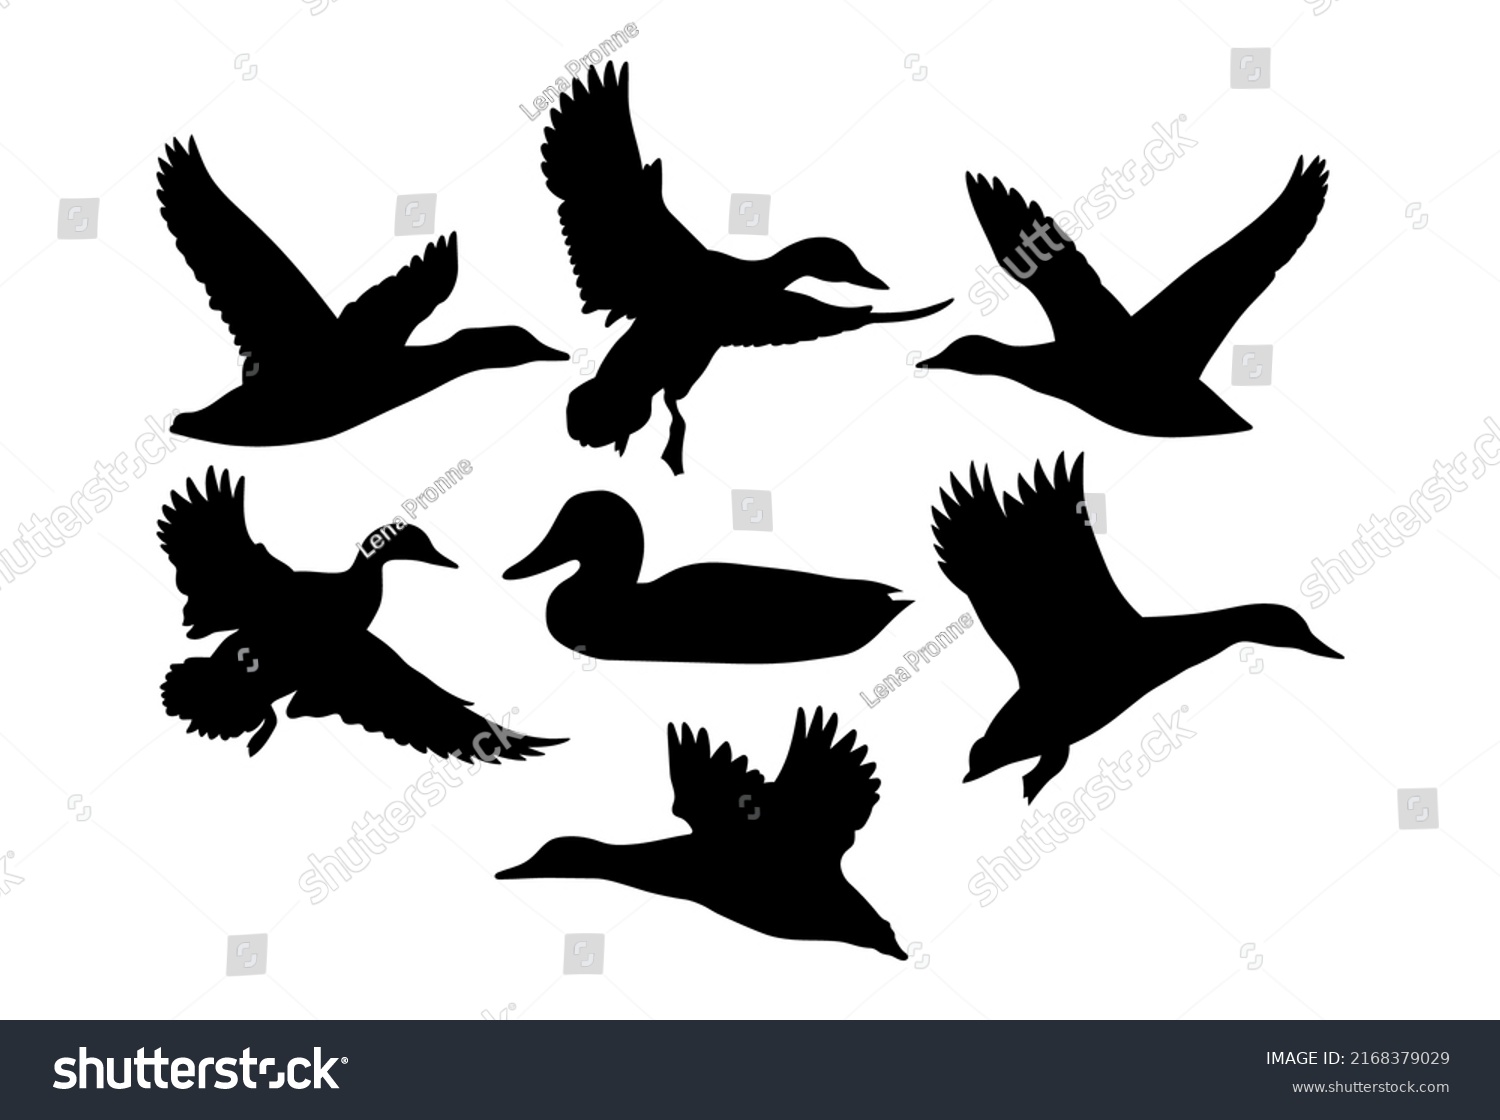 SVG of Duck flying, swimming. Template isolated on a white background svg